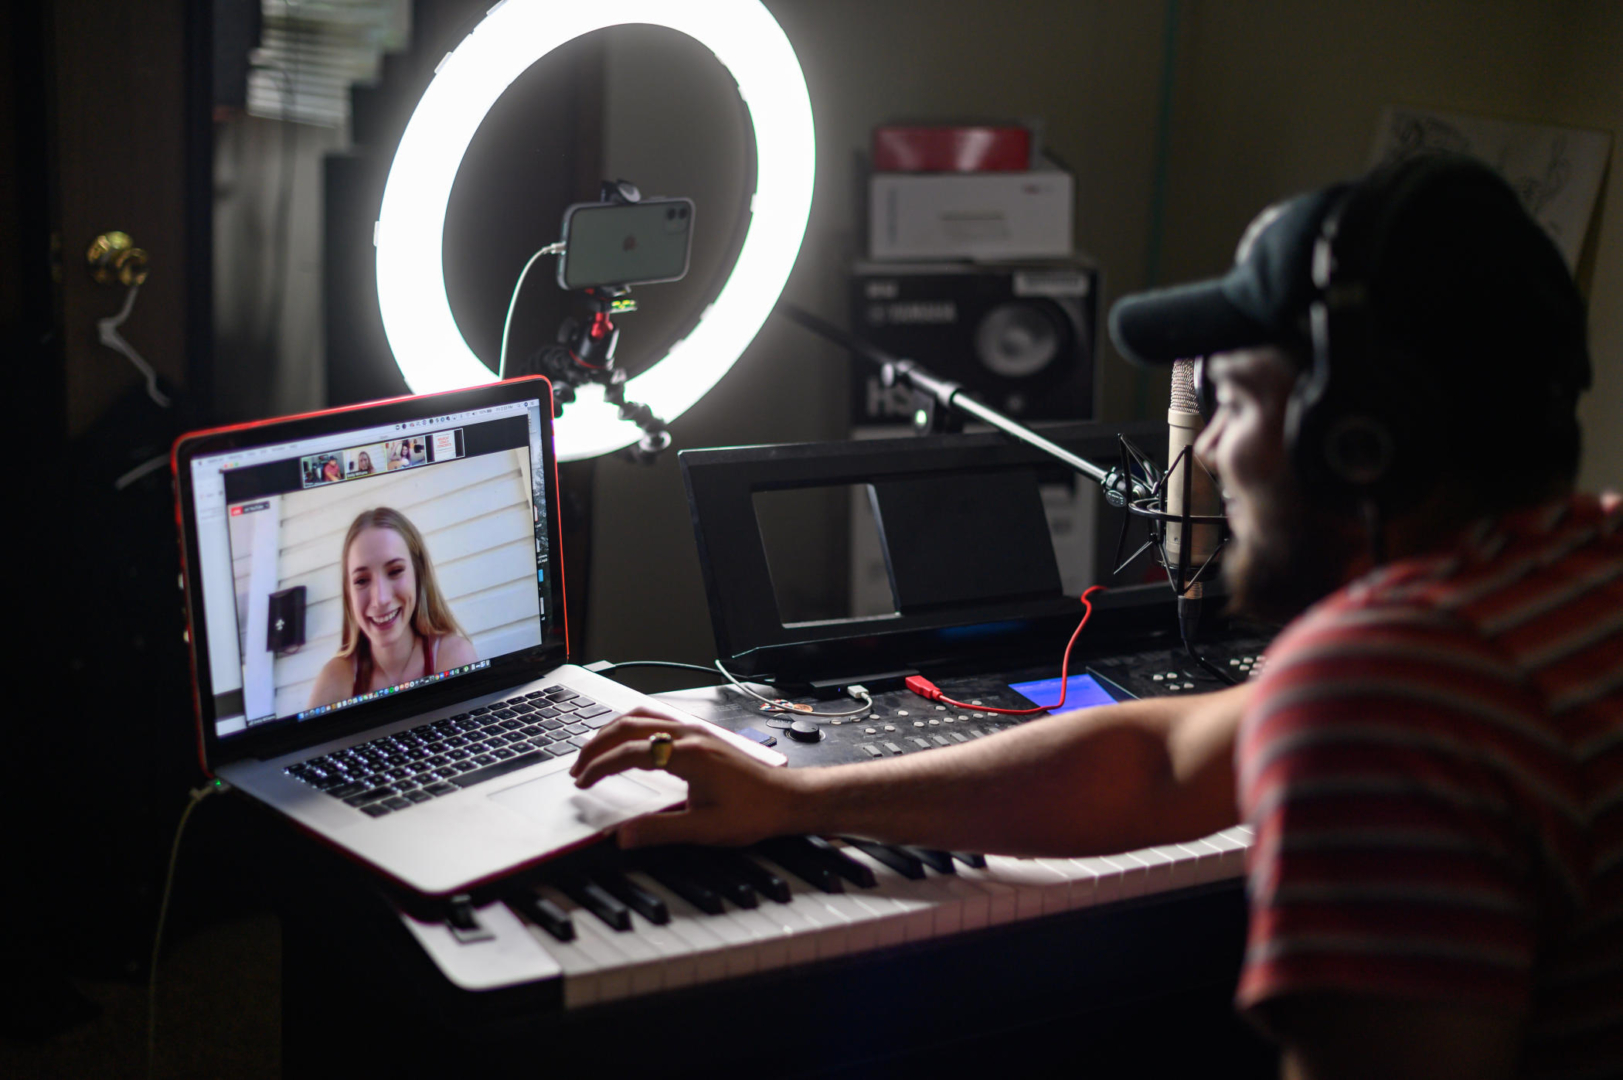 Daniel Hernandez talks to a student via zoom as he is lit up by a Halo light for audio recording.